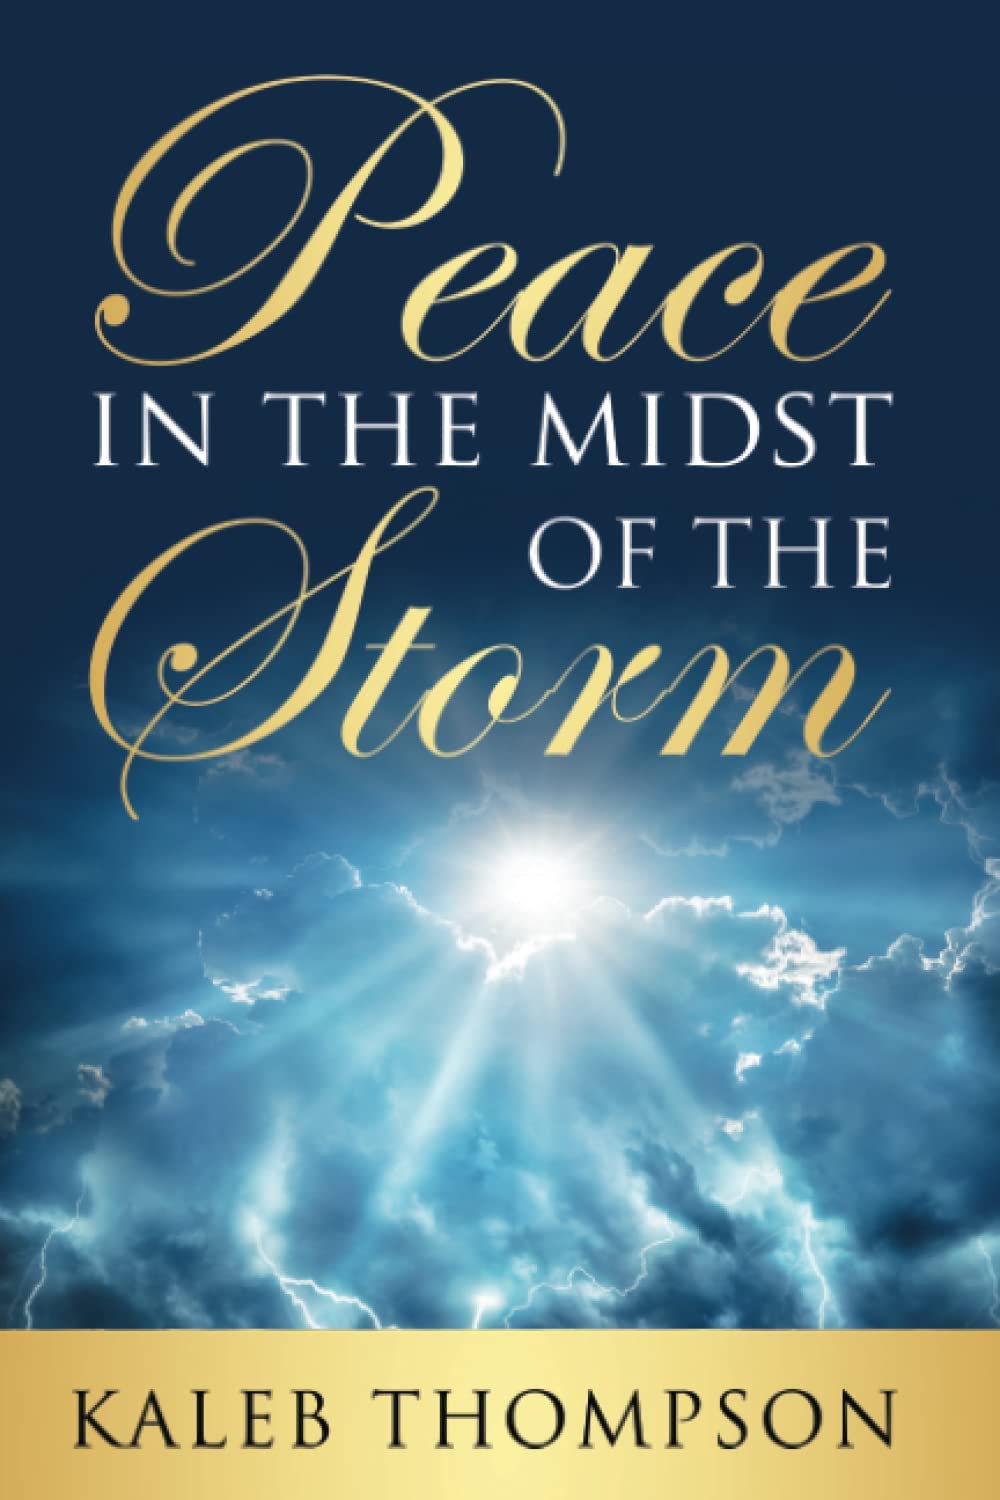 PEACE IN THE MIDST OF THE STORM by Kaleb Thompson